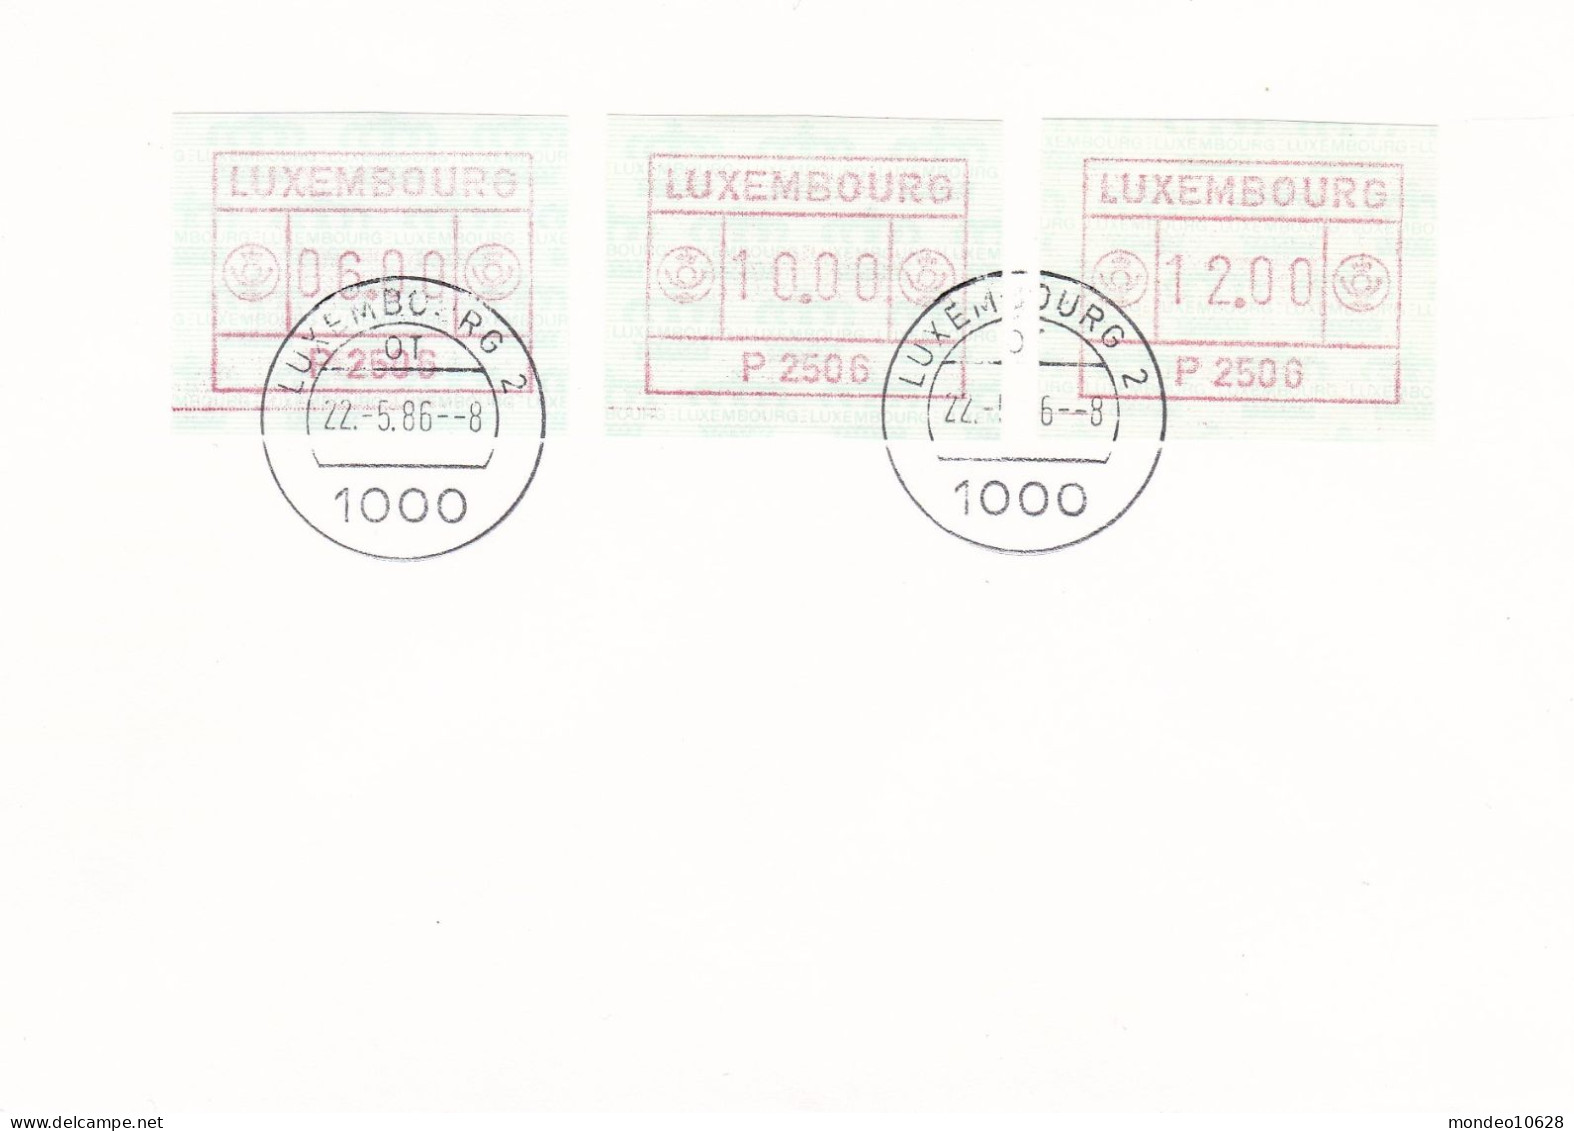 ATM Luxembourg, - Ausgabe 22.05.1986 - FDC Automat 2506 Luxembourg 2 (5) - Frankeervignetten